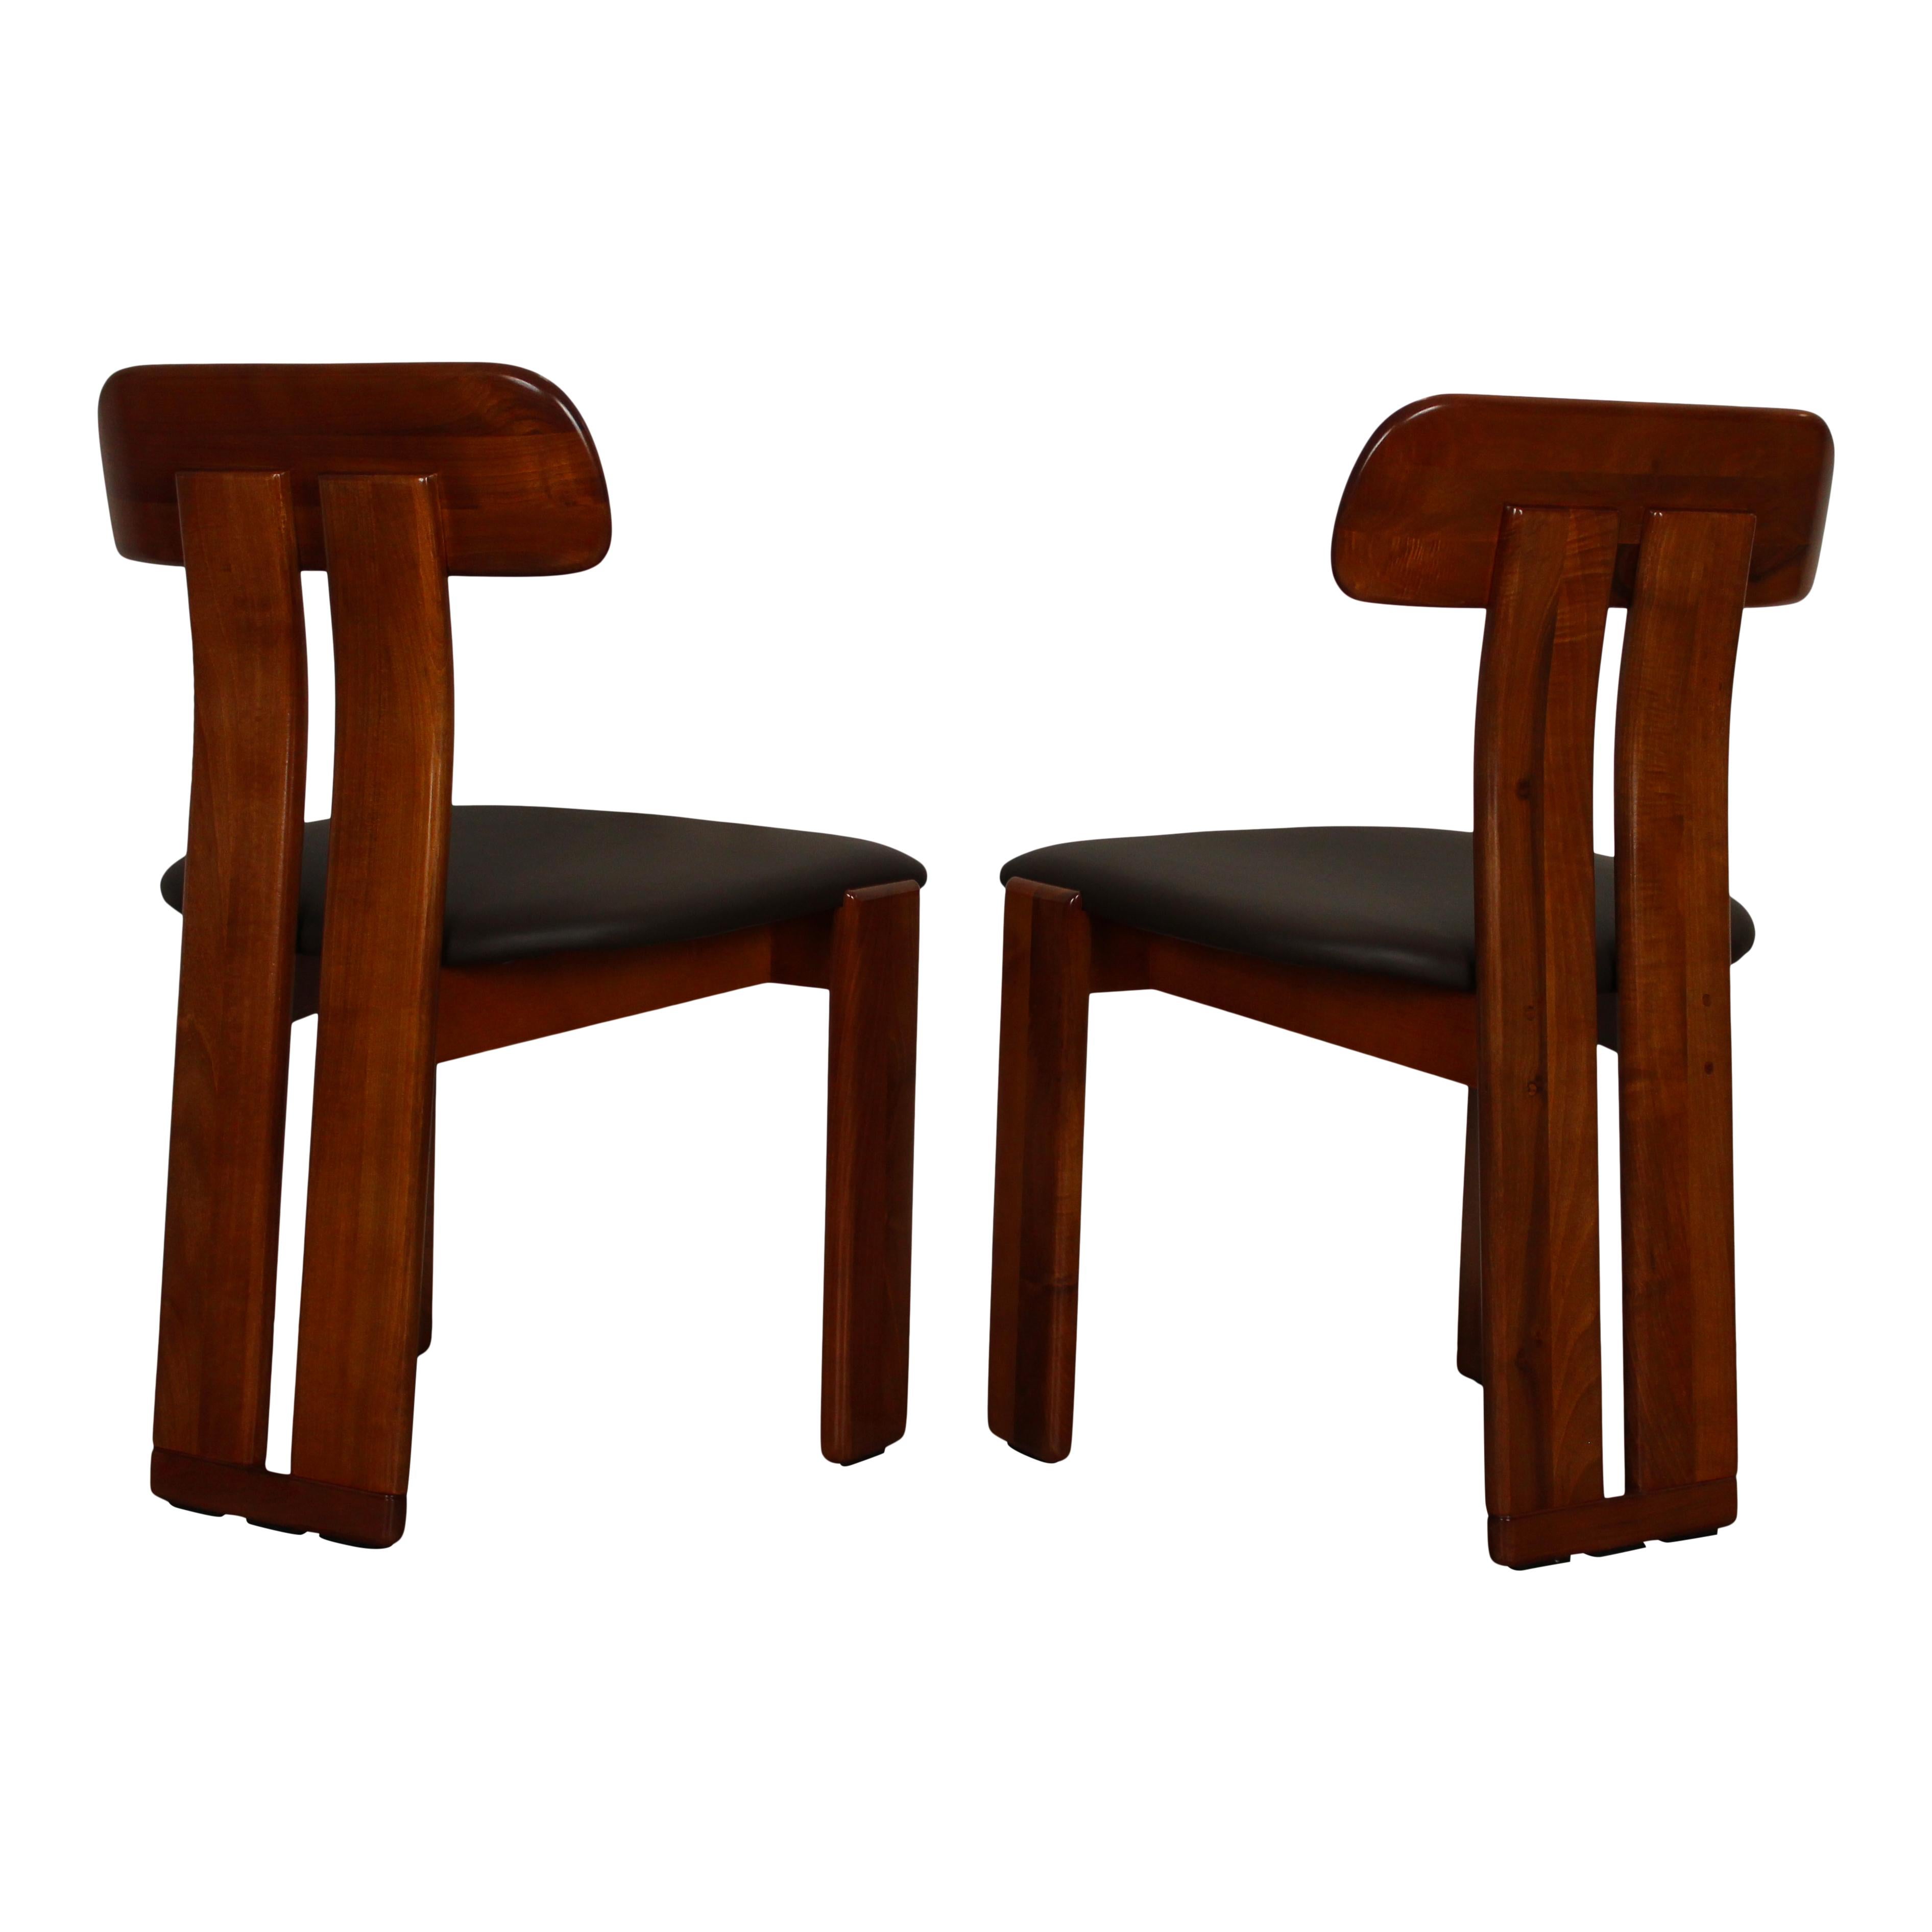 Mario Marenco Walnut Sapporo Dining Chairs for Mobilgirgi, 1970s, Set of 8 For Sale 1